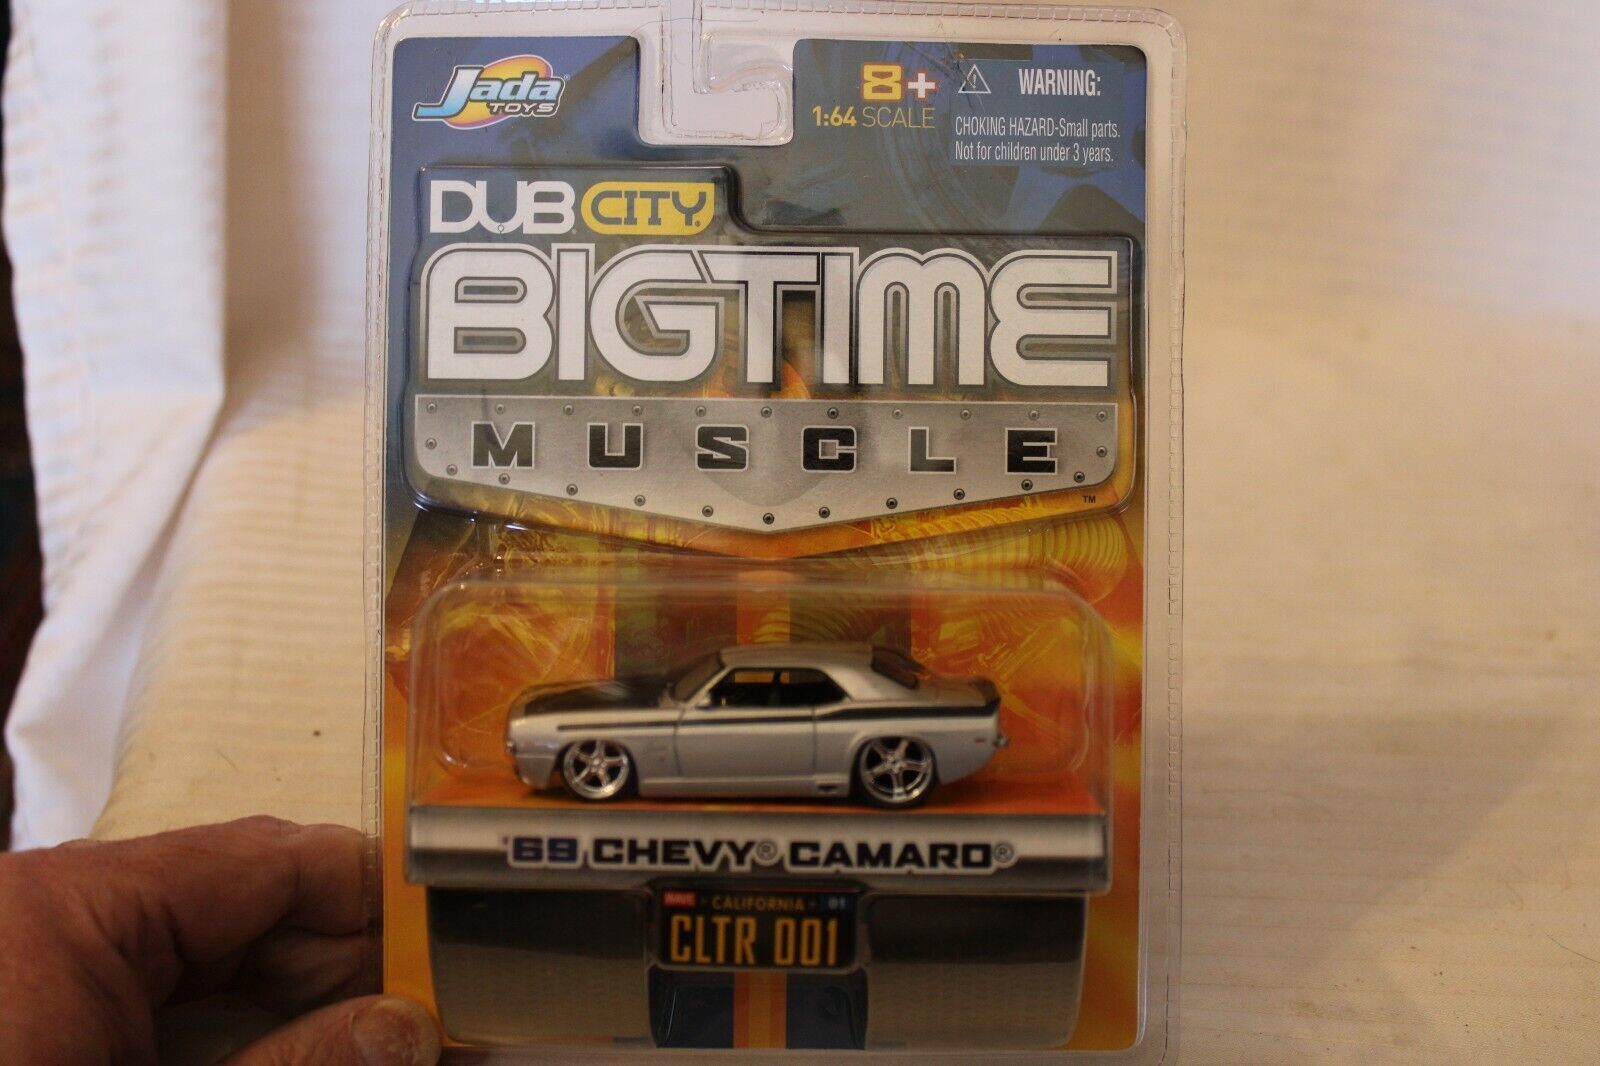 Primary image for 1/64 Scale Dub City Big Time Muscle, 1969 Chevy Camaro, Silver Die Cast